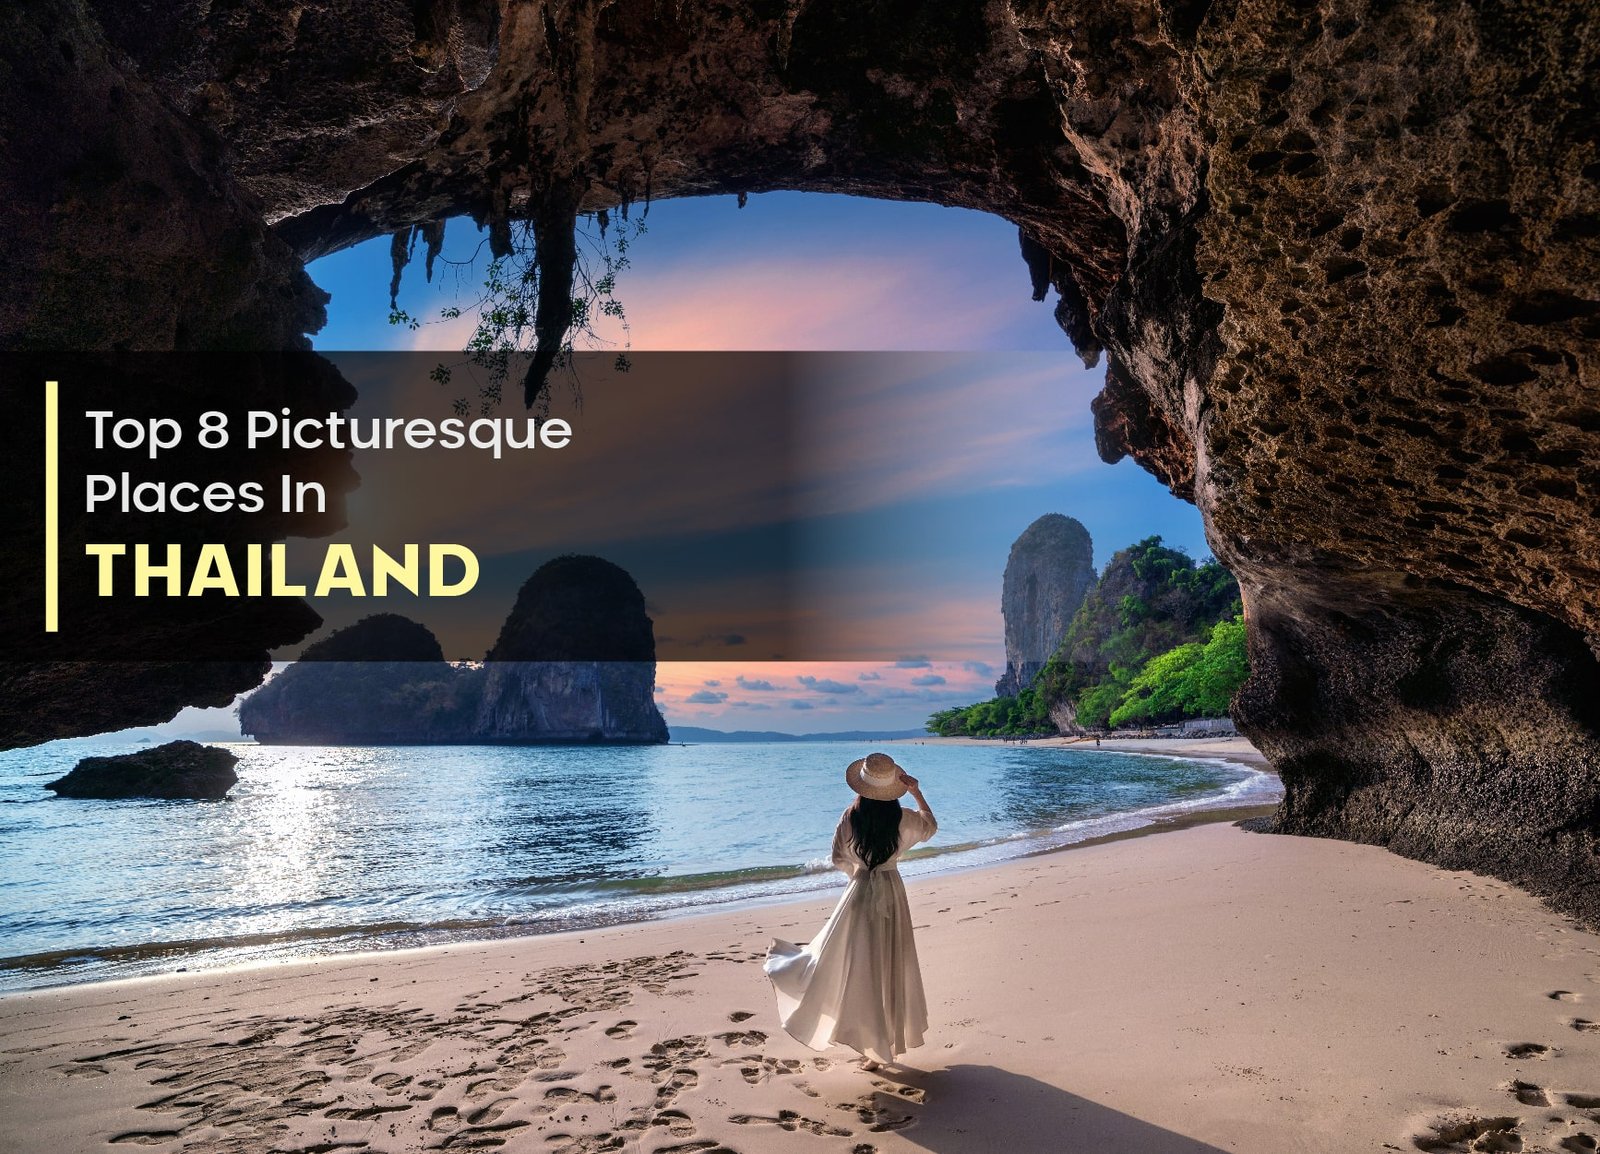 Top 8 Picturesque Places In Thailand